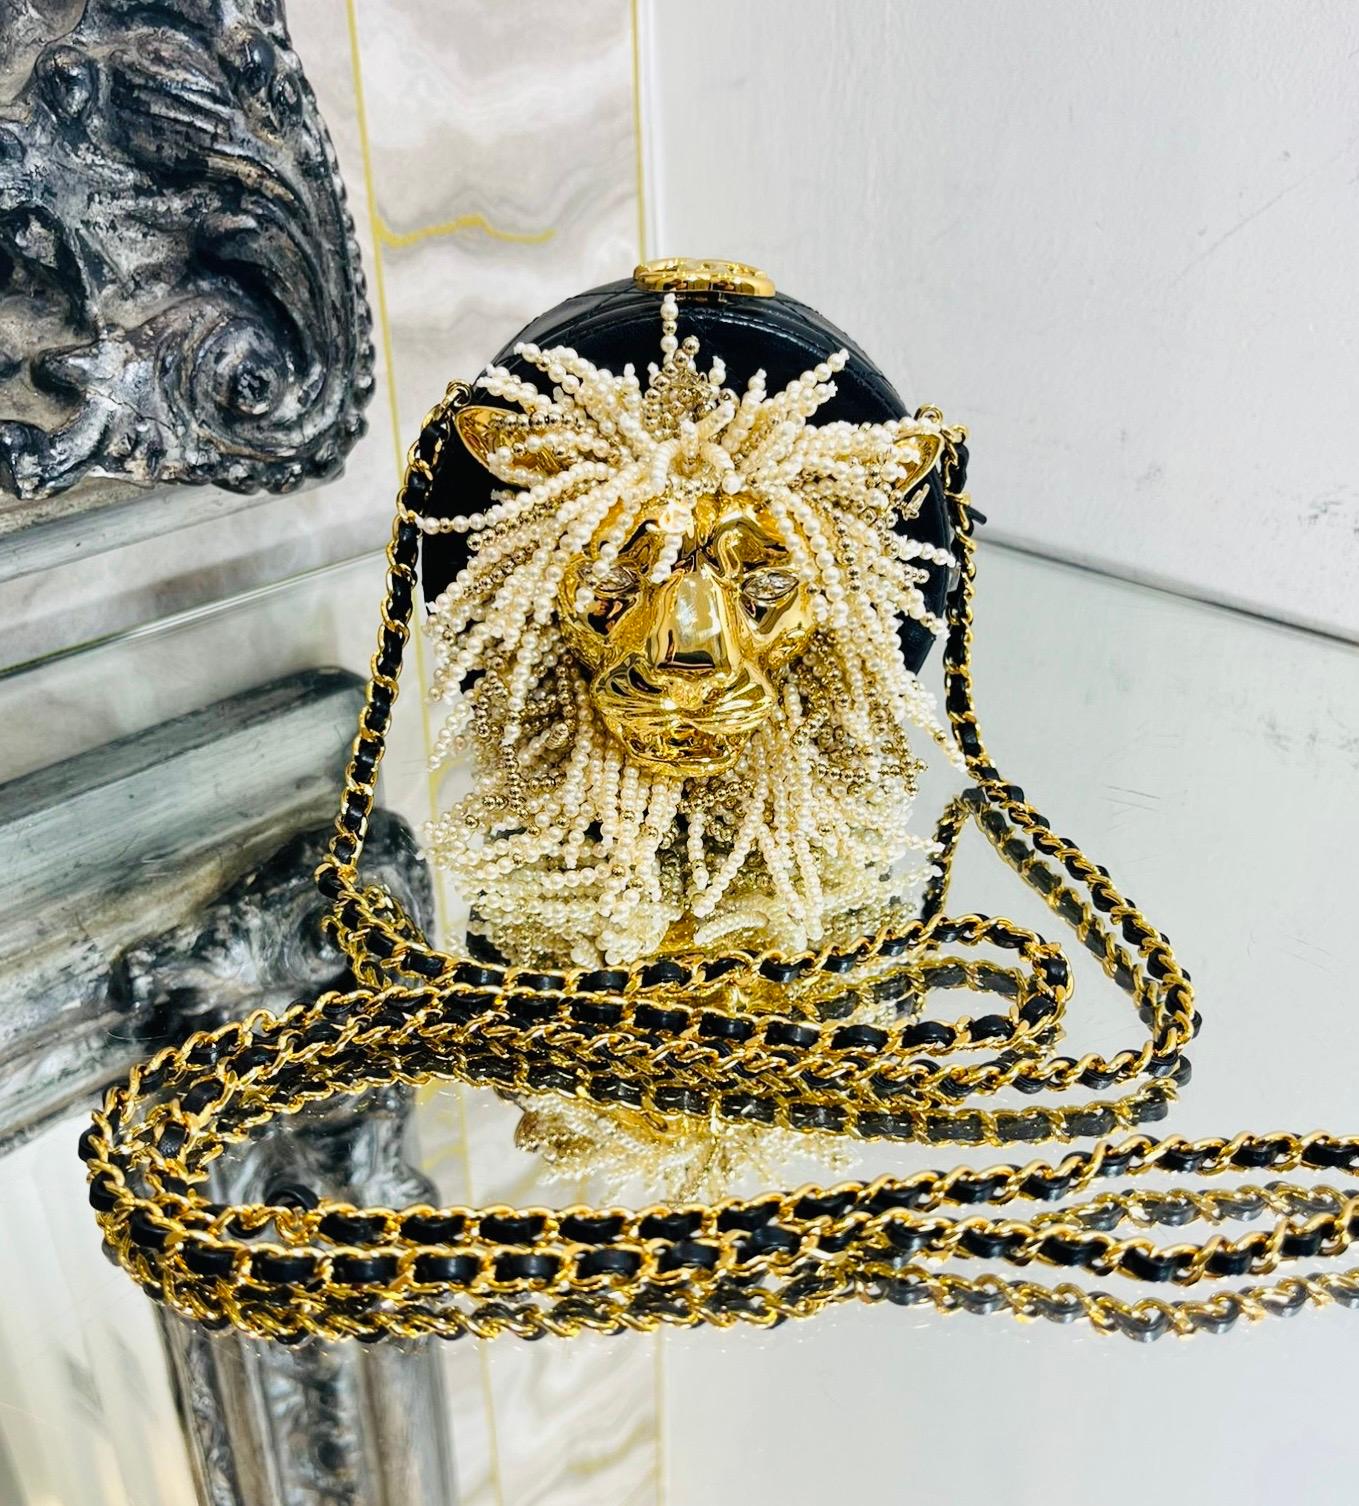 Exceptional Piece - Chanel Lion Head Pearl & Leather Evening Bag

Black, round shaped evening bag crafted from lambskin leather designed with iconic diamond quilting.

Featuring oversized, gold Lion head to the centre detailed with glass pearl mane